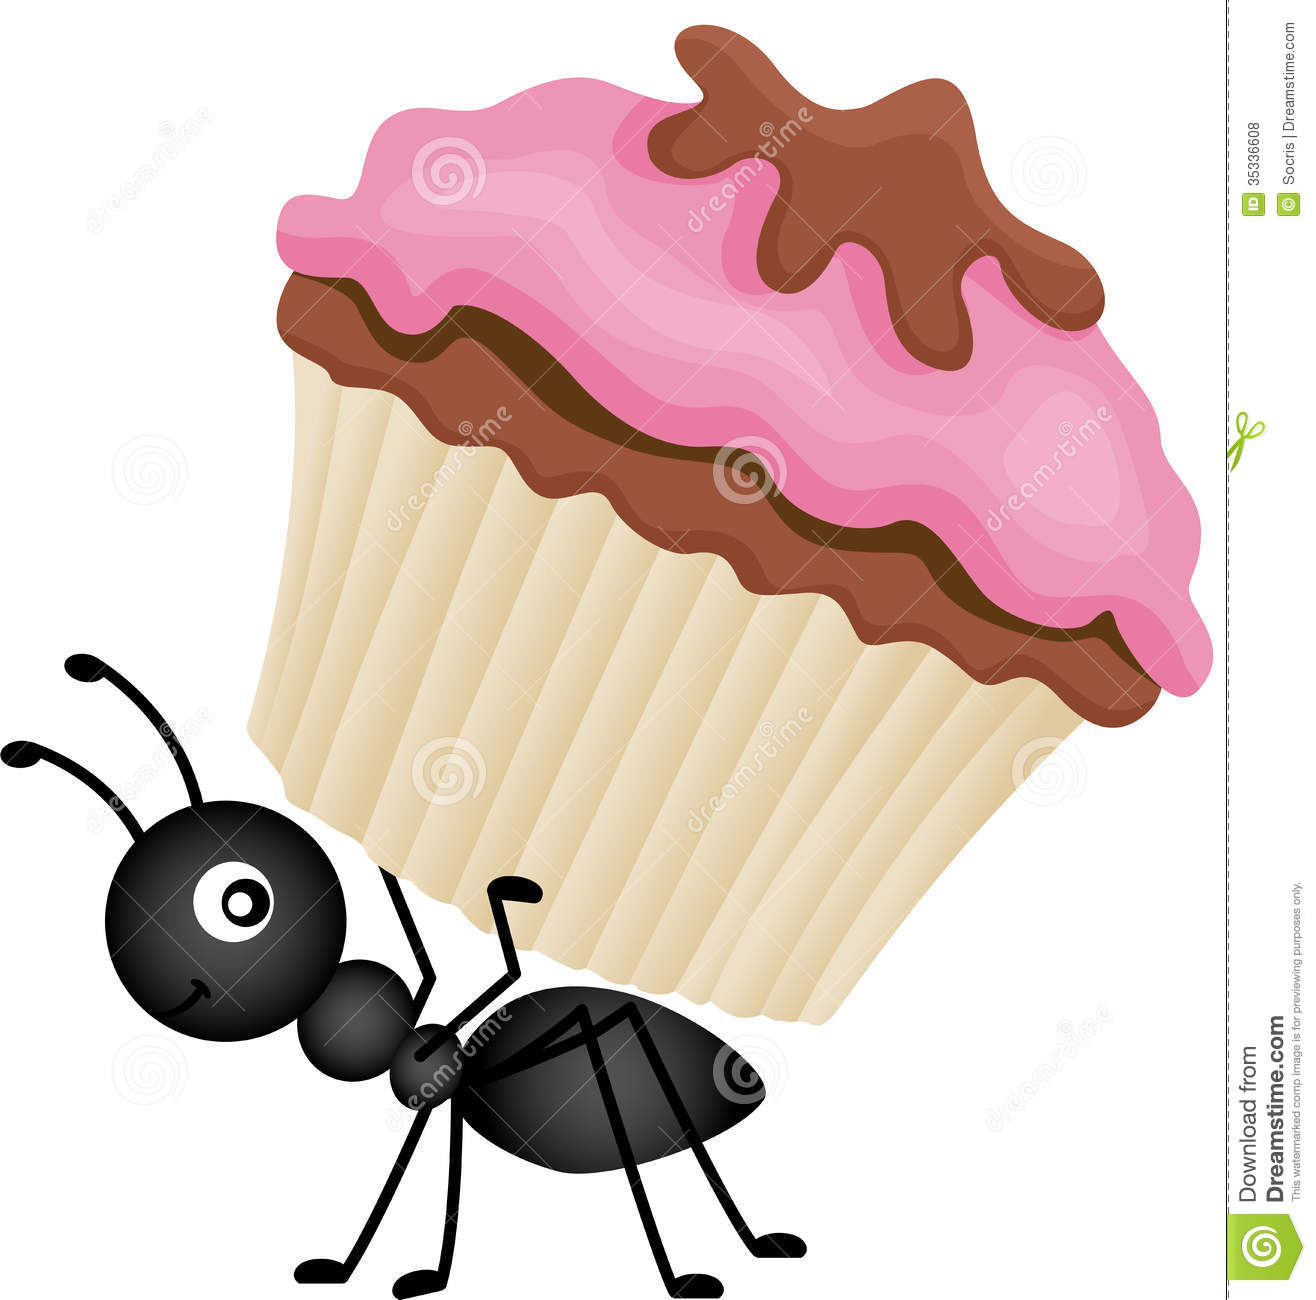 Ants carrying food clipart.